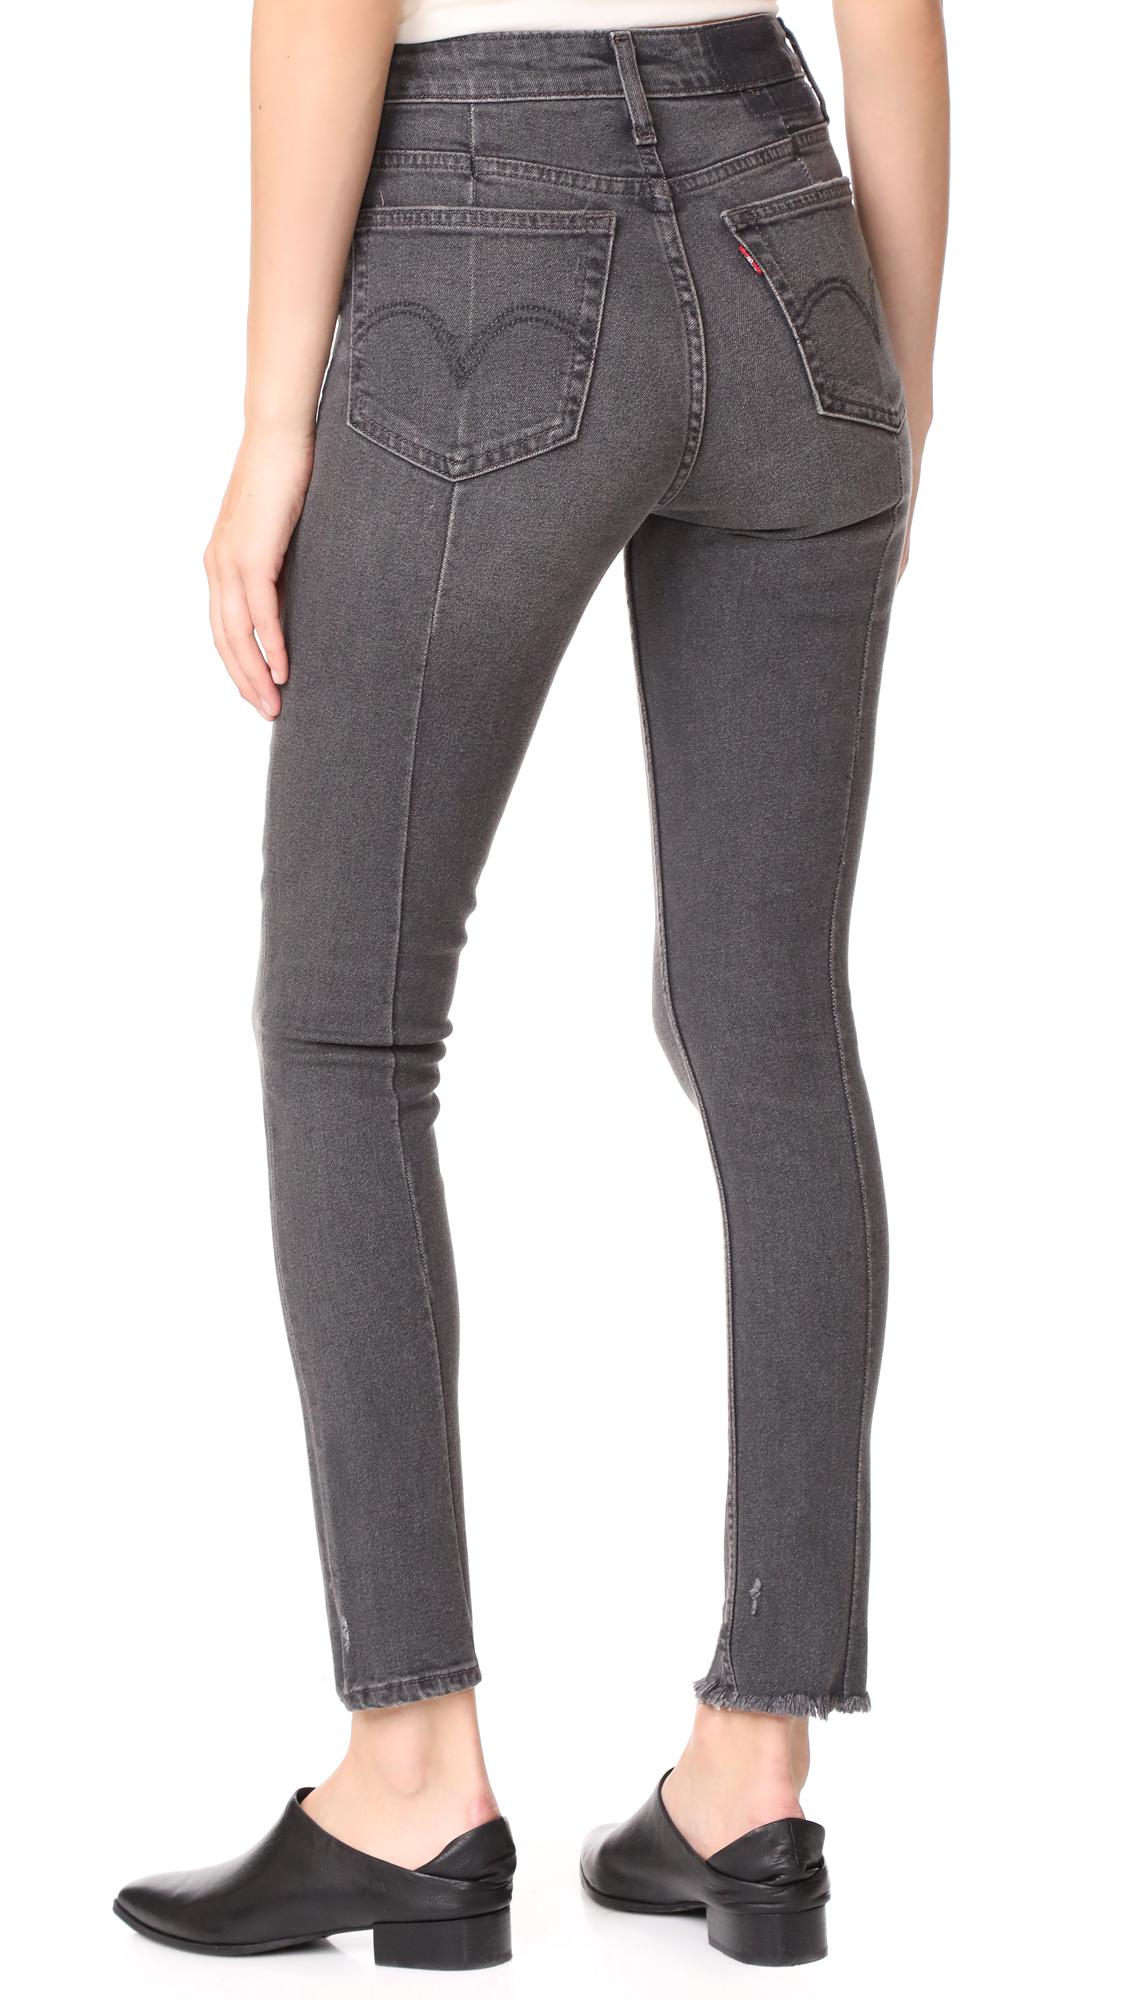 Levi's Denim 721 Altered High Rise Skinny Jeans in up in Smoke (Gray) | Lyst